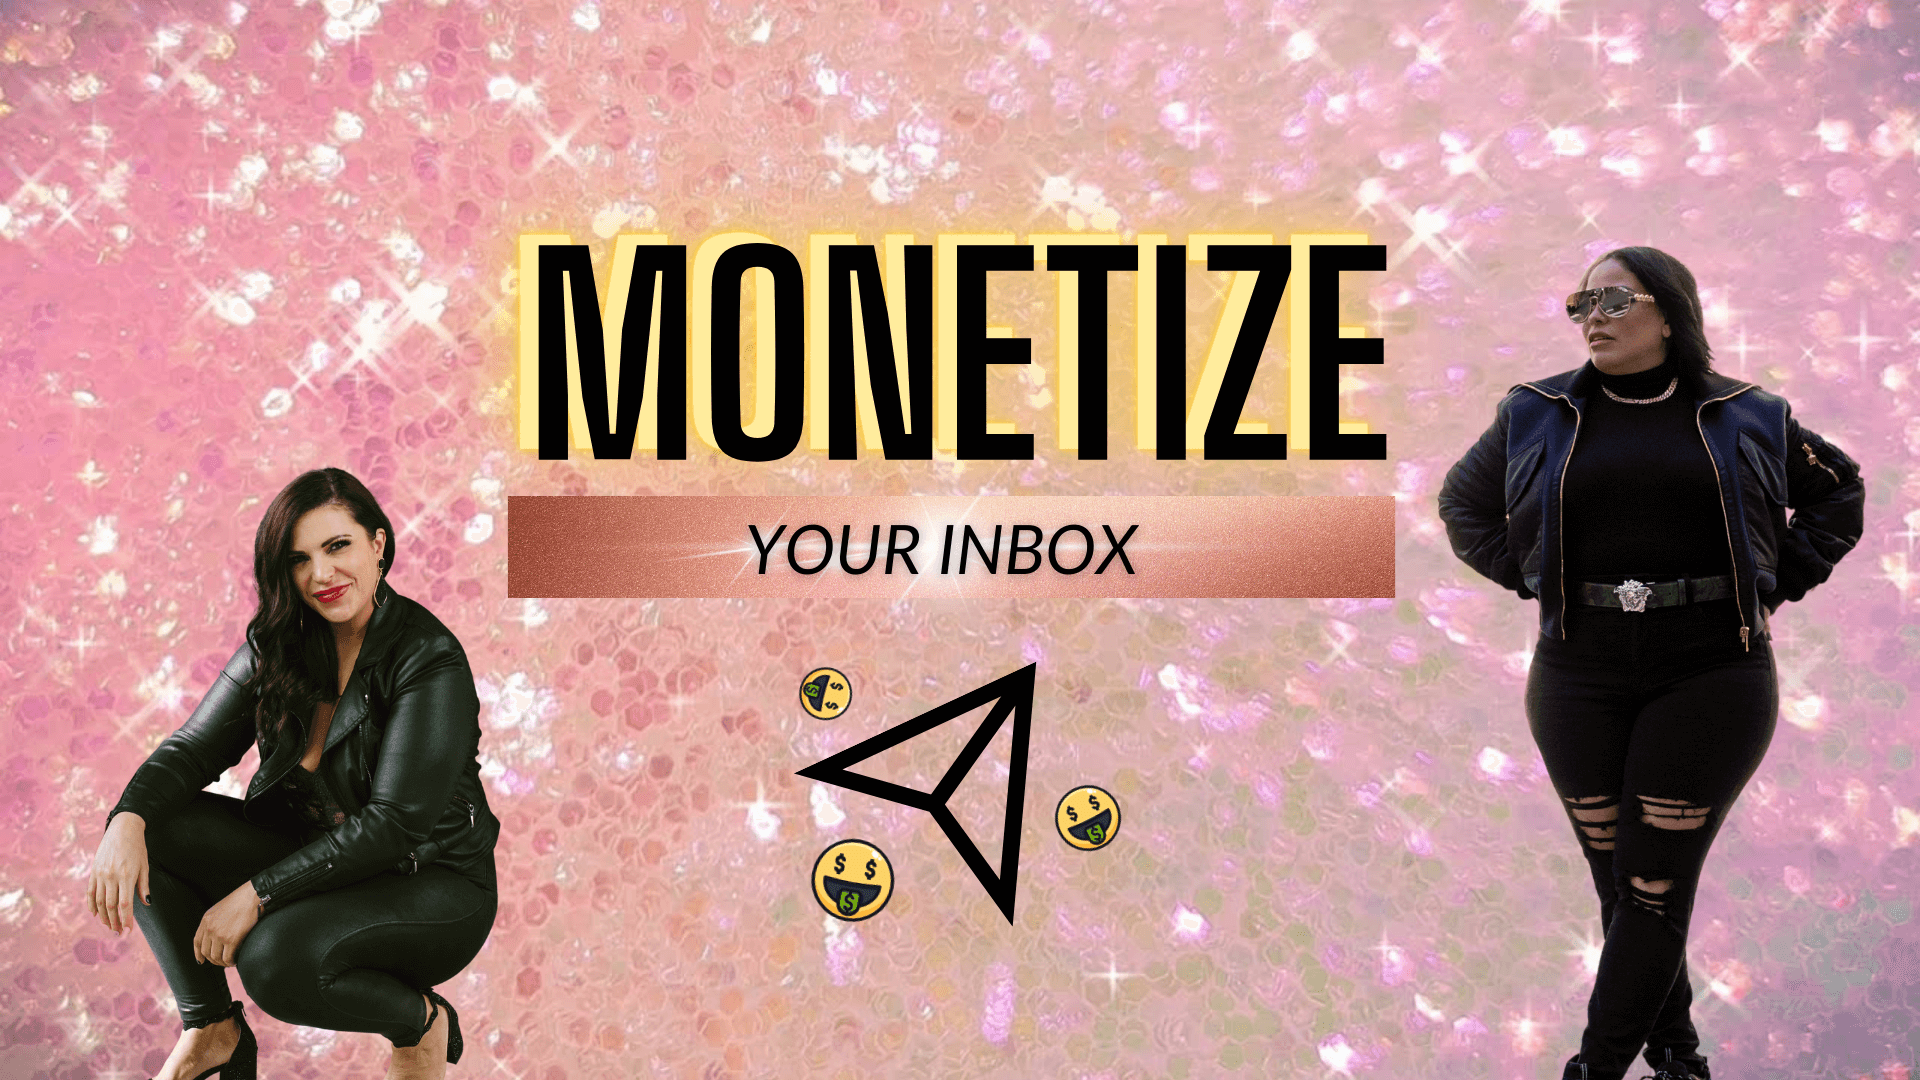 Monetize Your Inbox with Jenna Faith and Ali Gardner